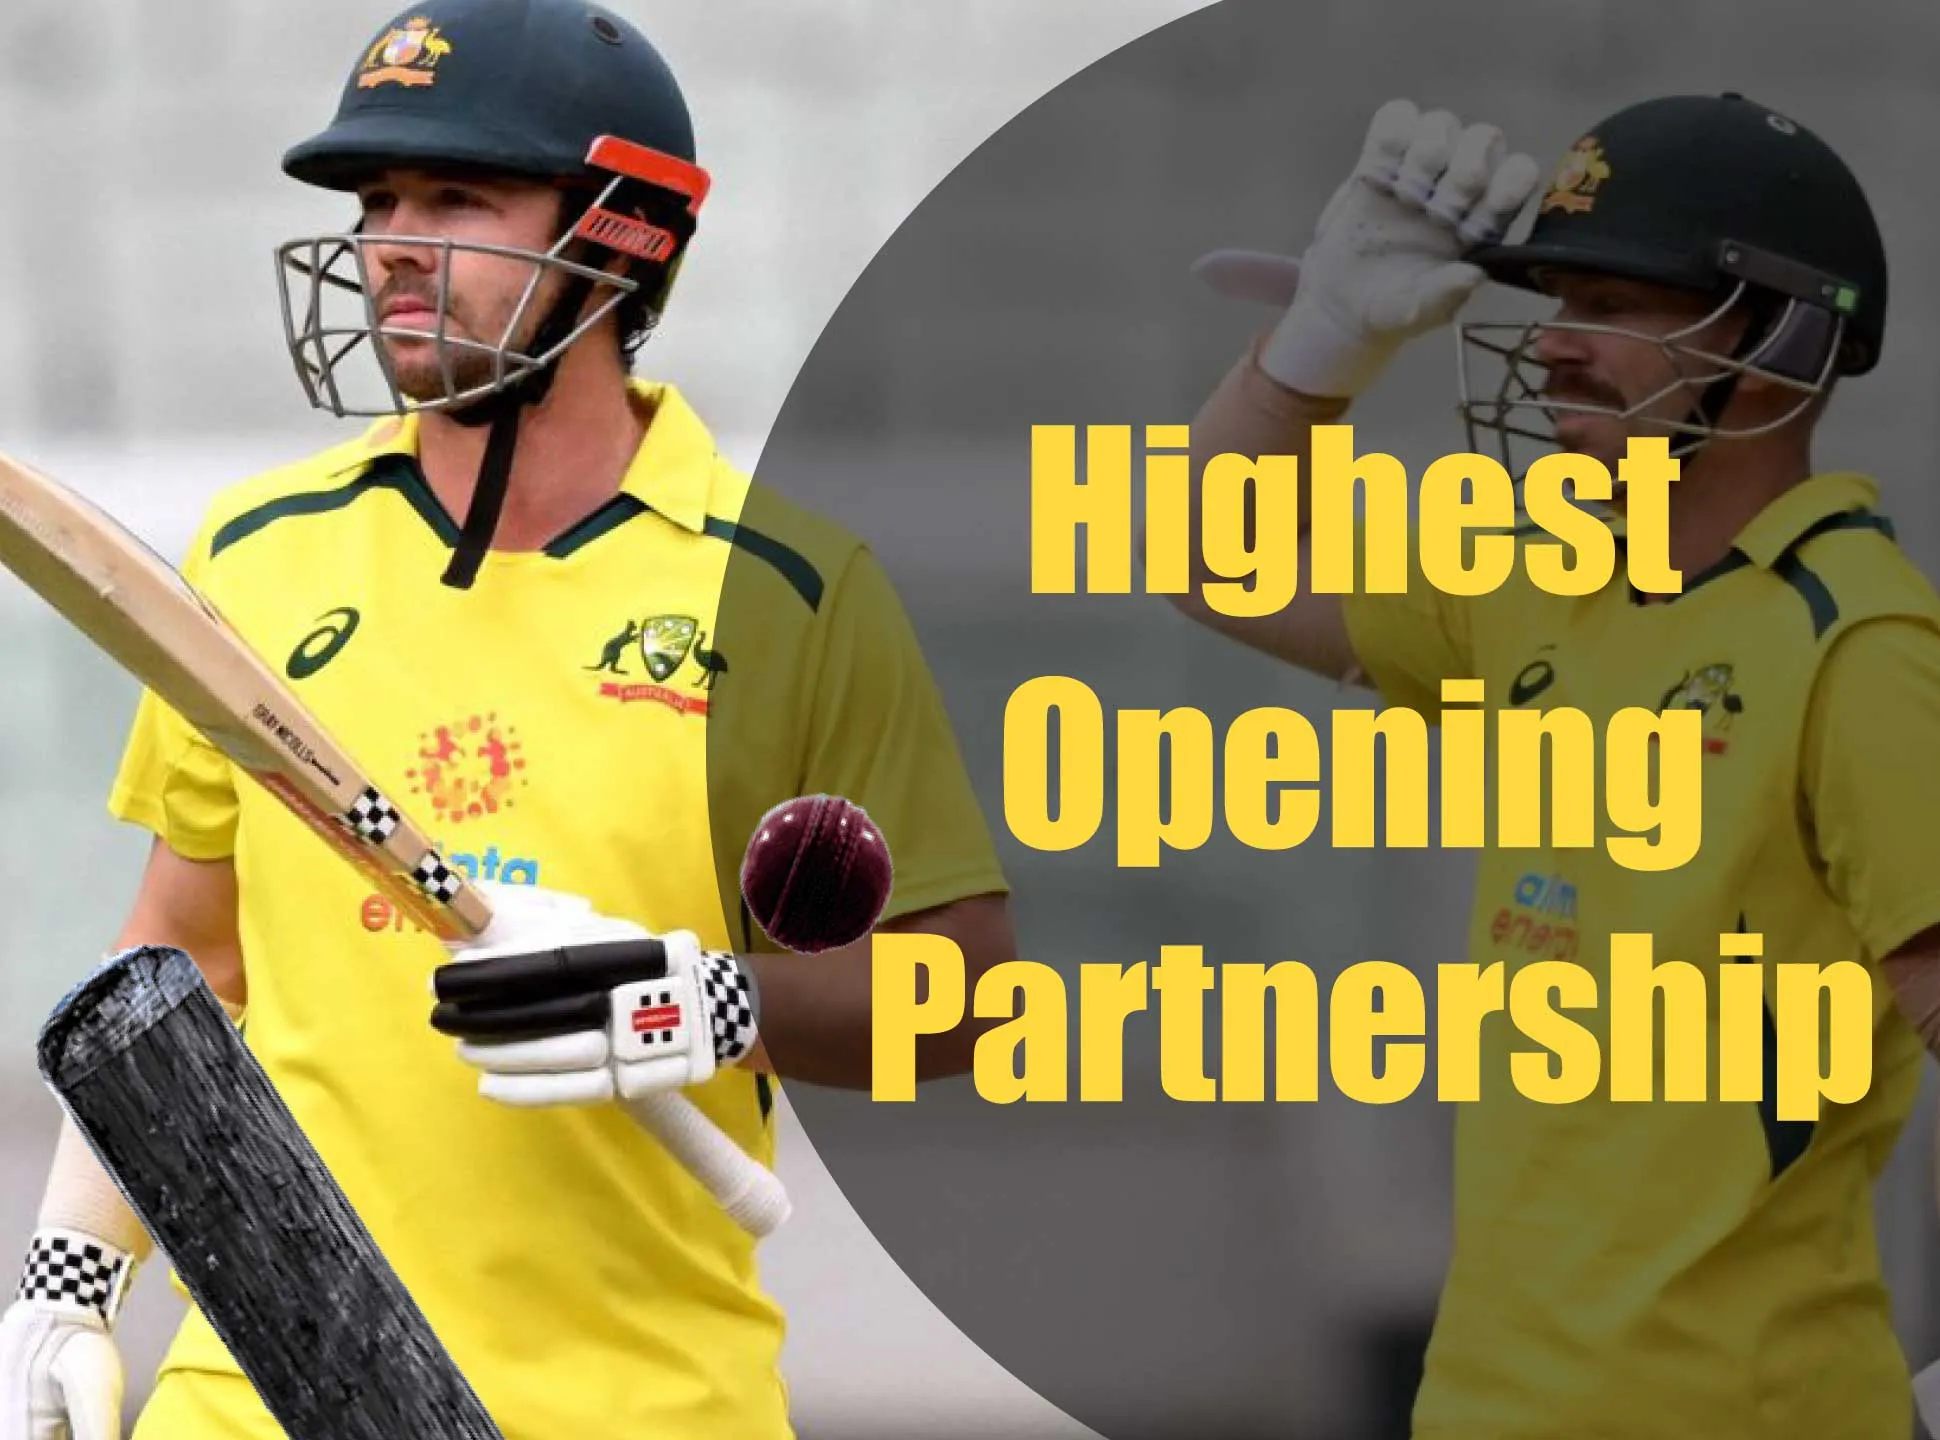 Place bets on the highest opening partnership.